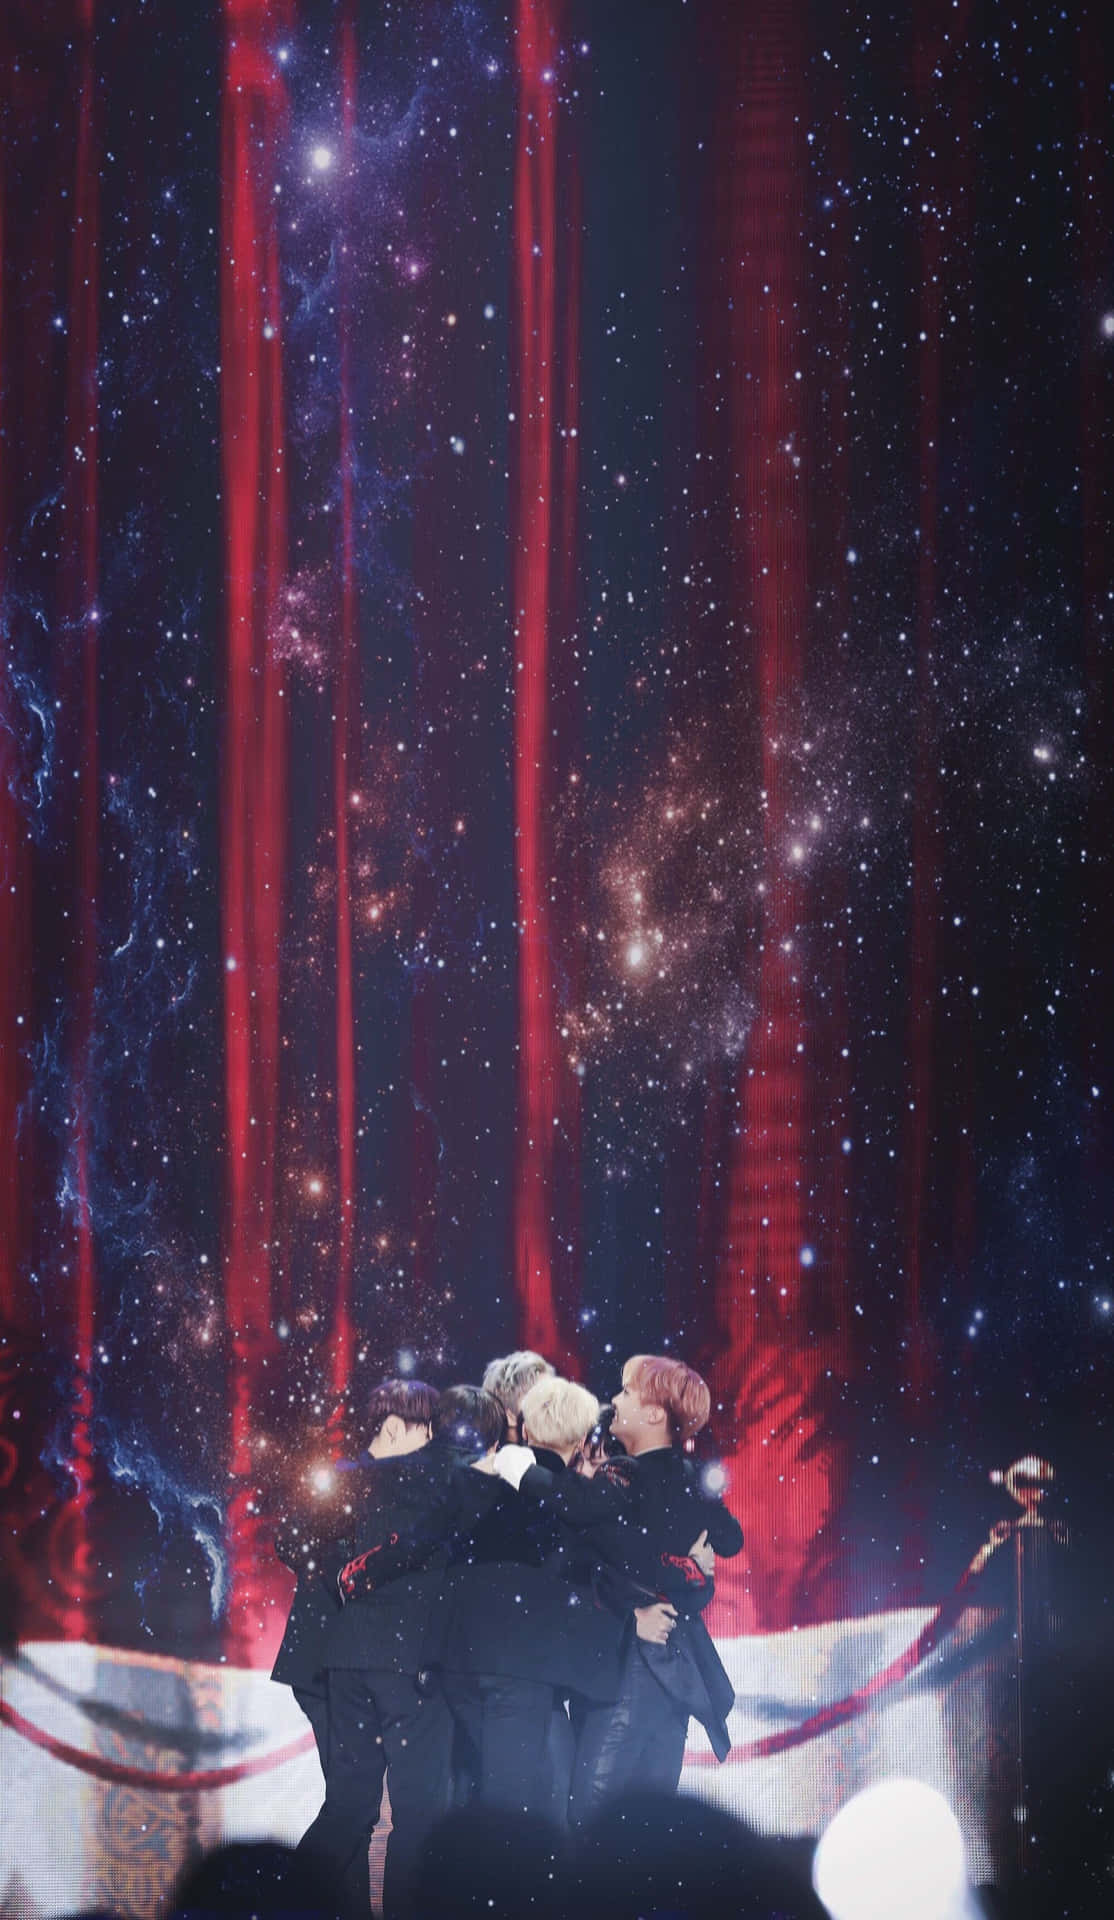 BTS performing live on stage during a concert Wallpaper